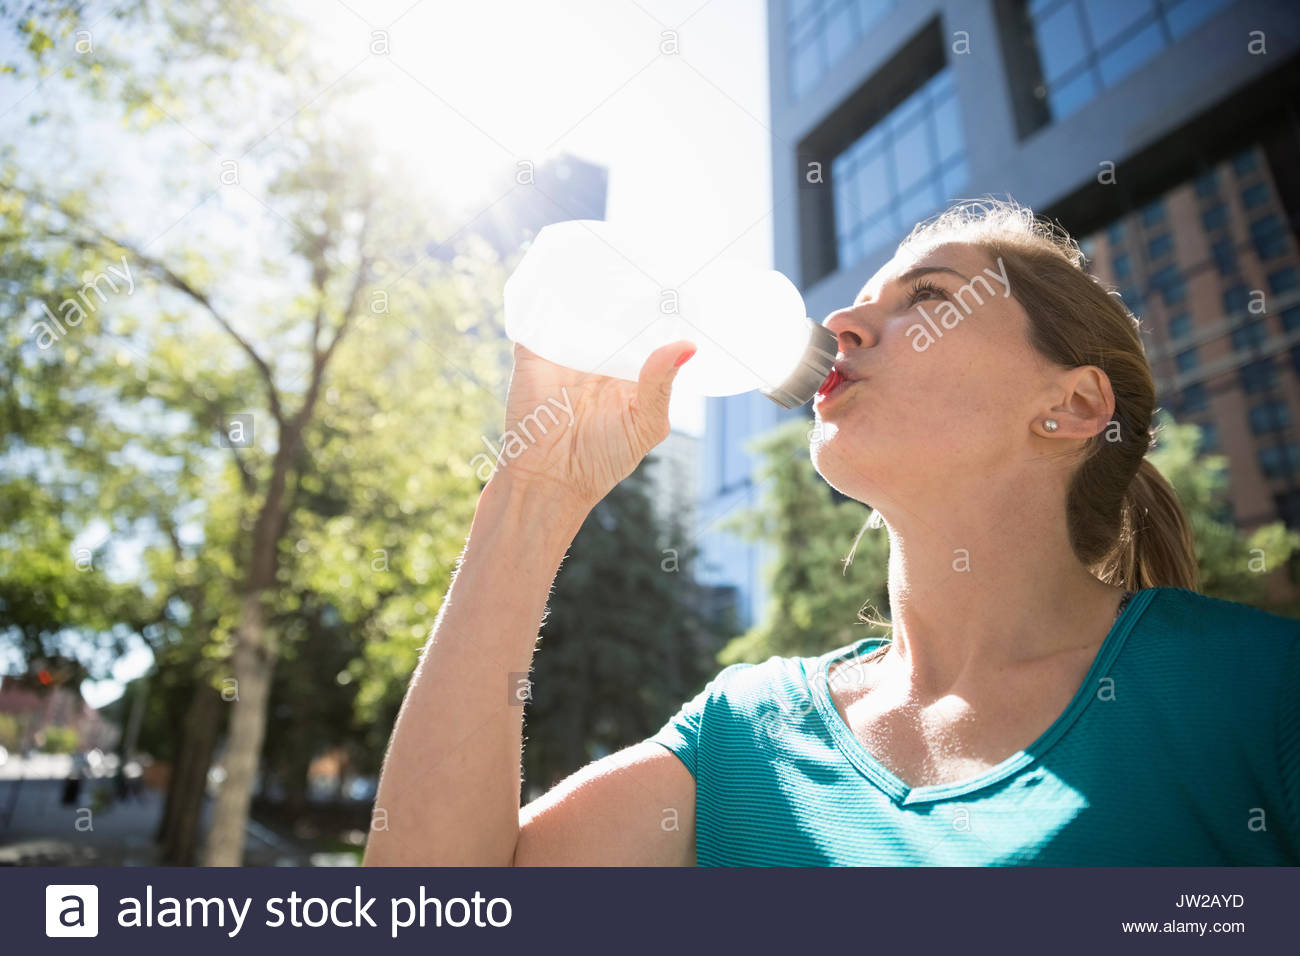 Female runner drinking water from water bottle in sunny urban park Stock Photo